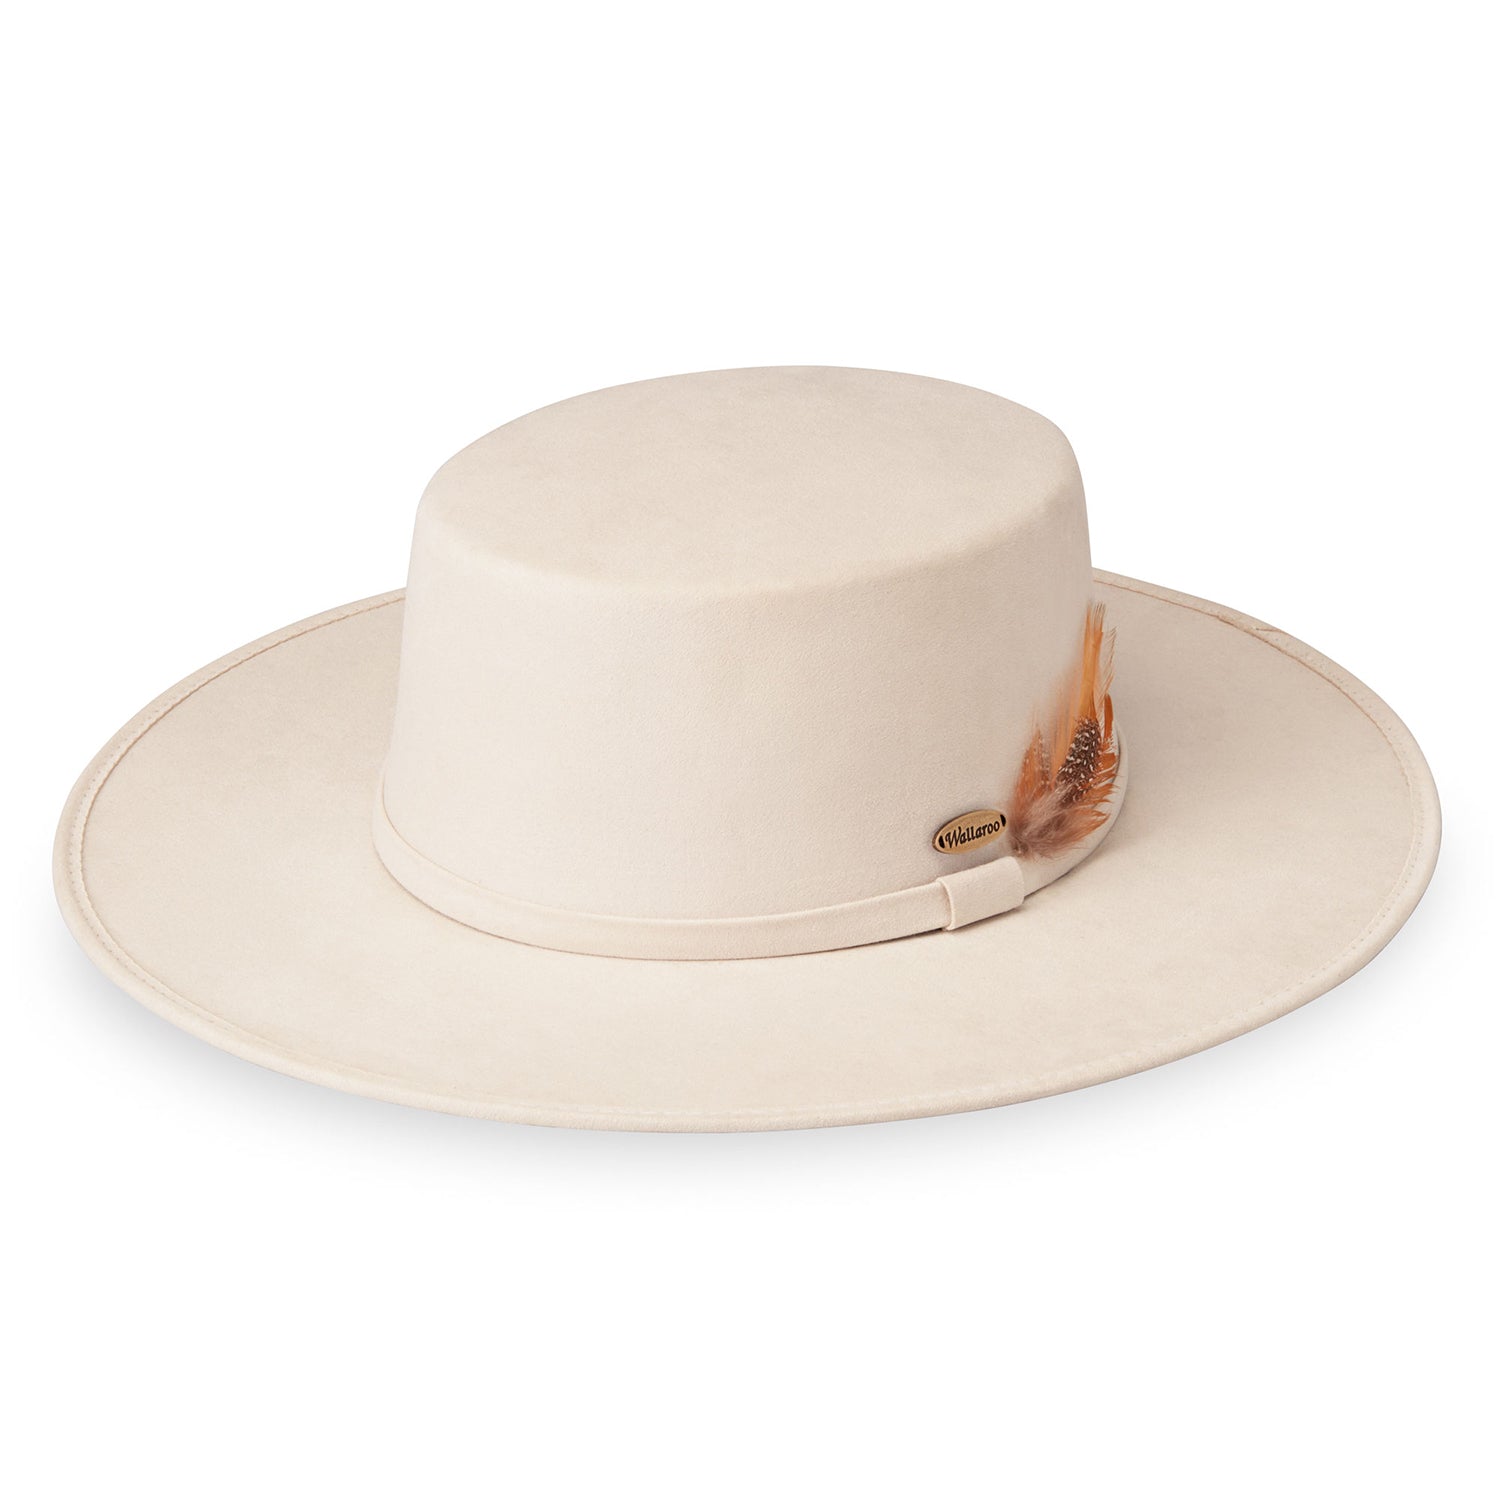 Featuring Ladies' winter sun hat with a big wide brim by Wallaroo